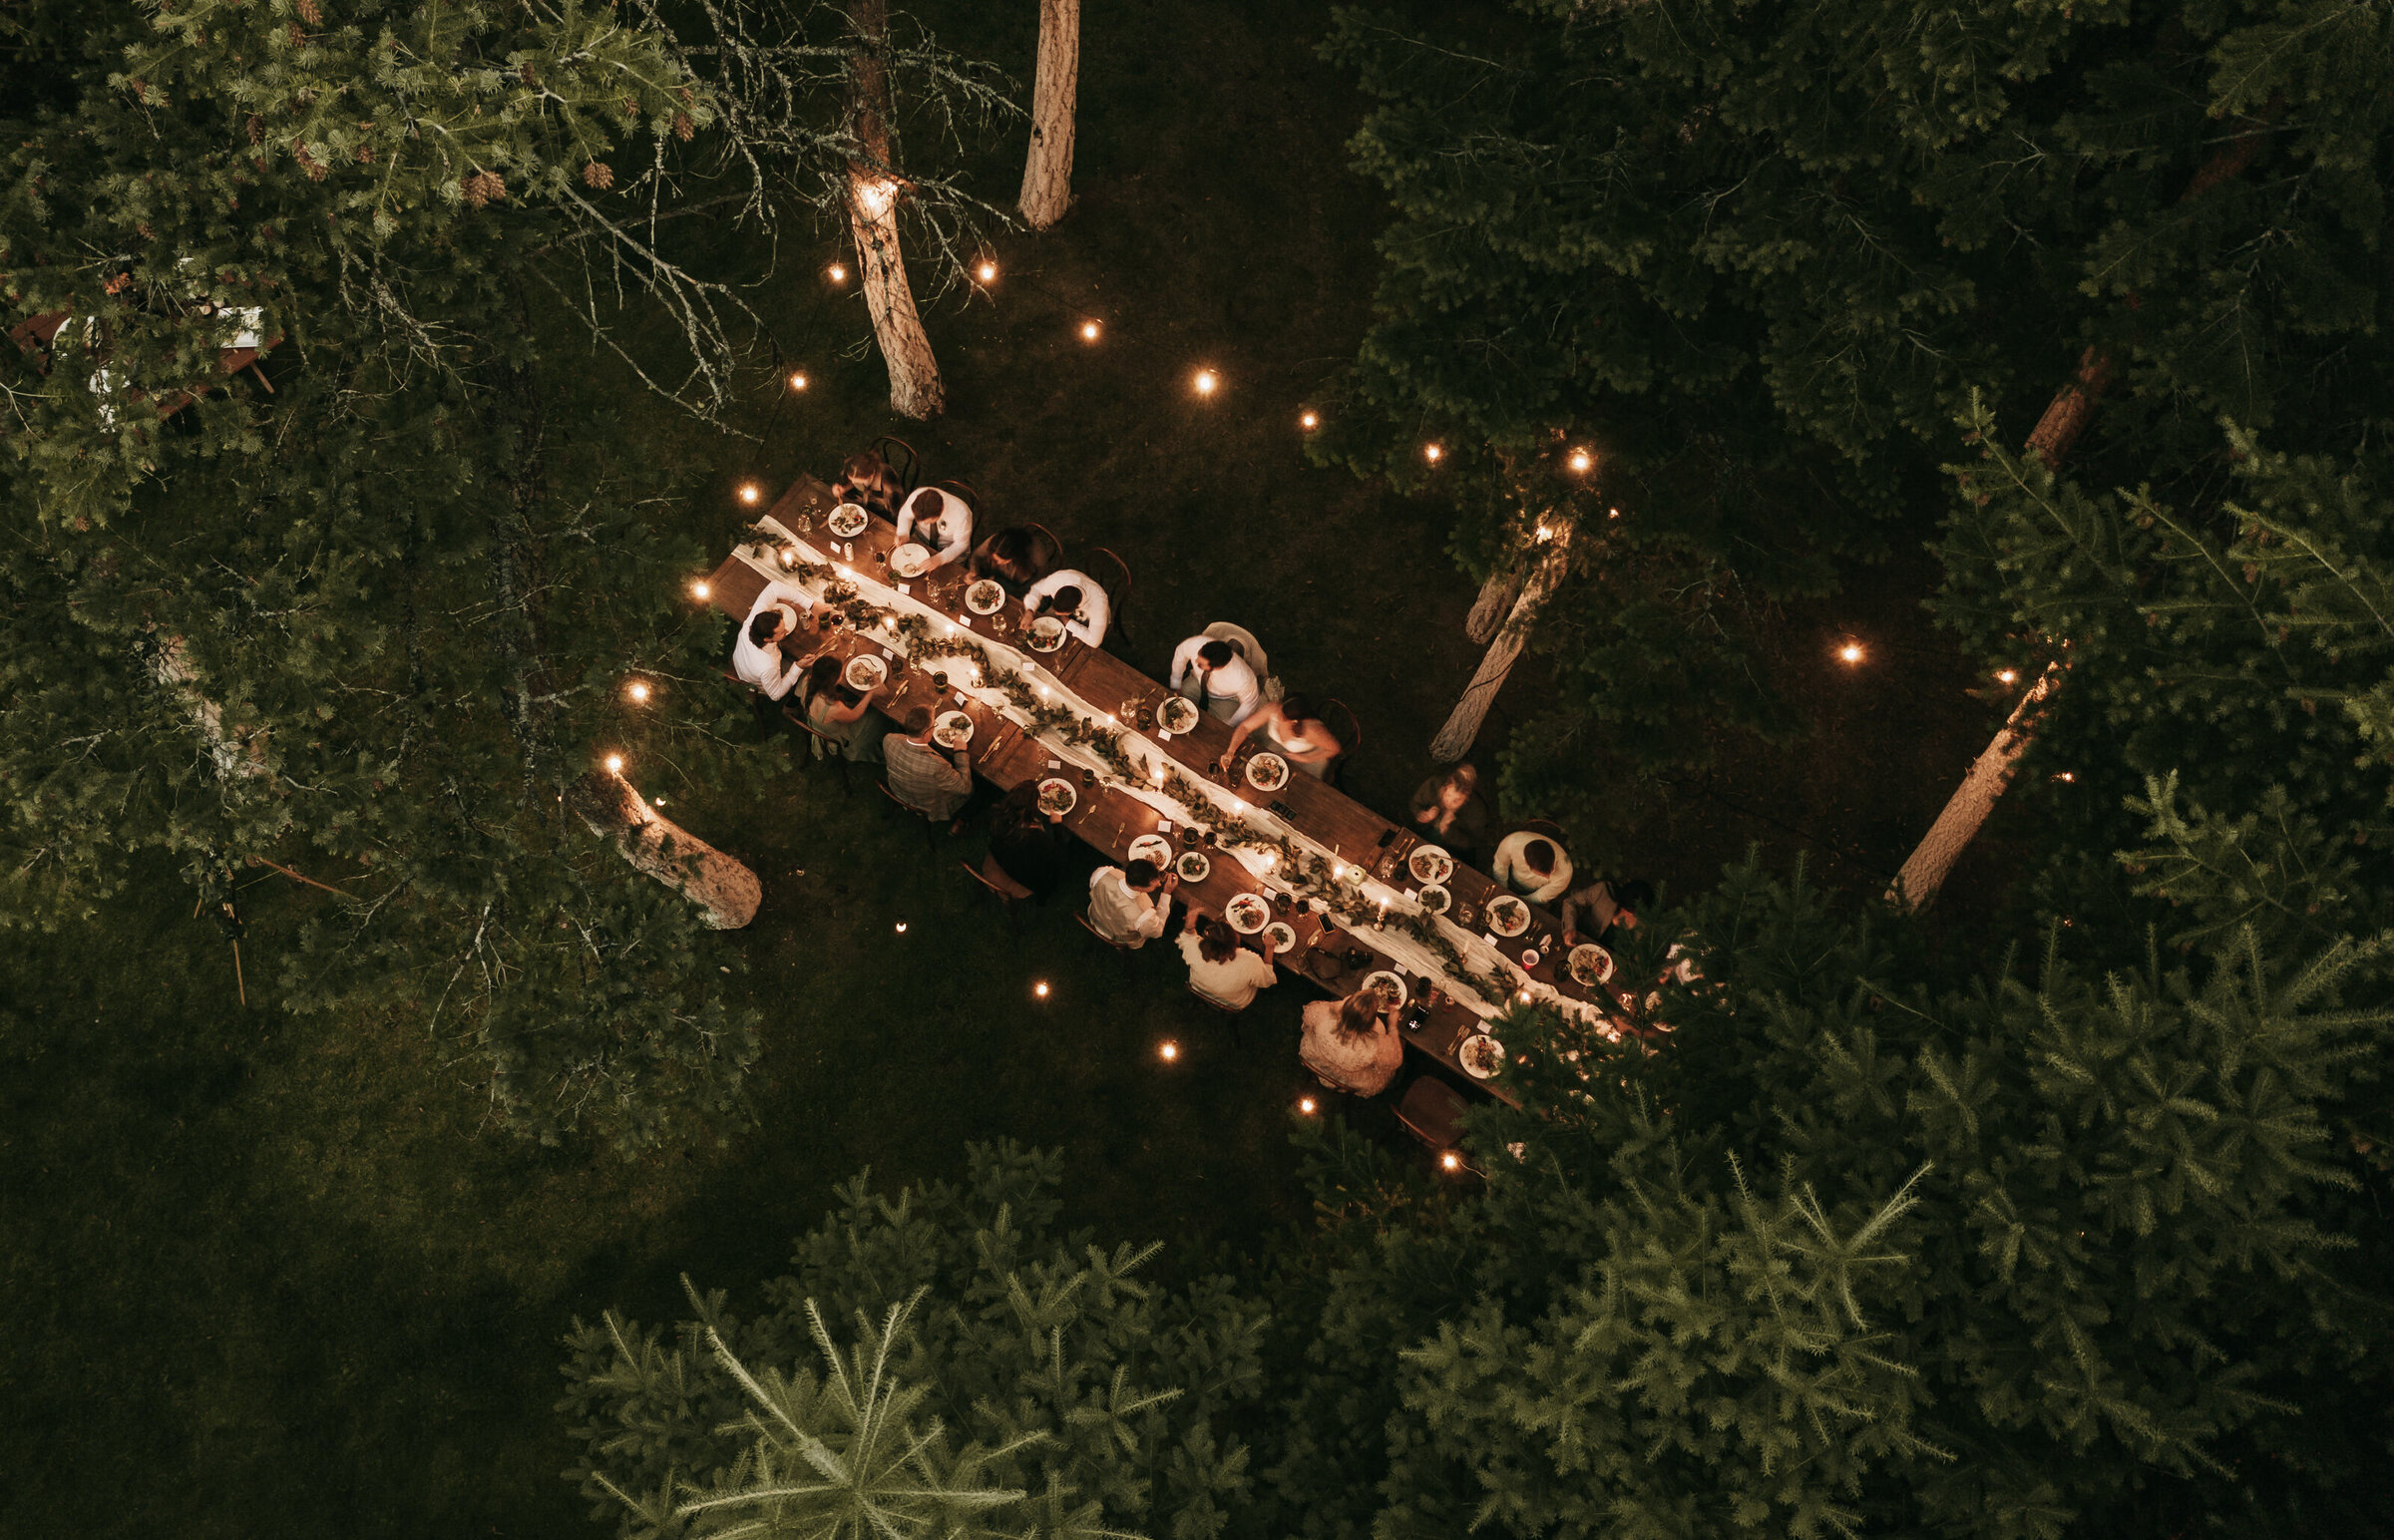 A whimsical elopement dinner shot from above with twinkling lights and trees.